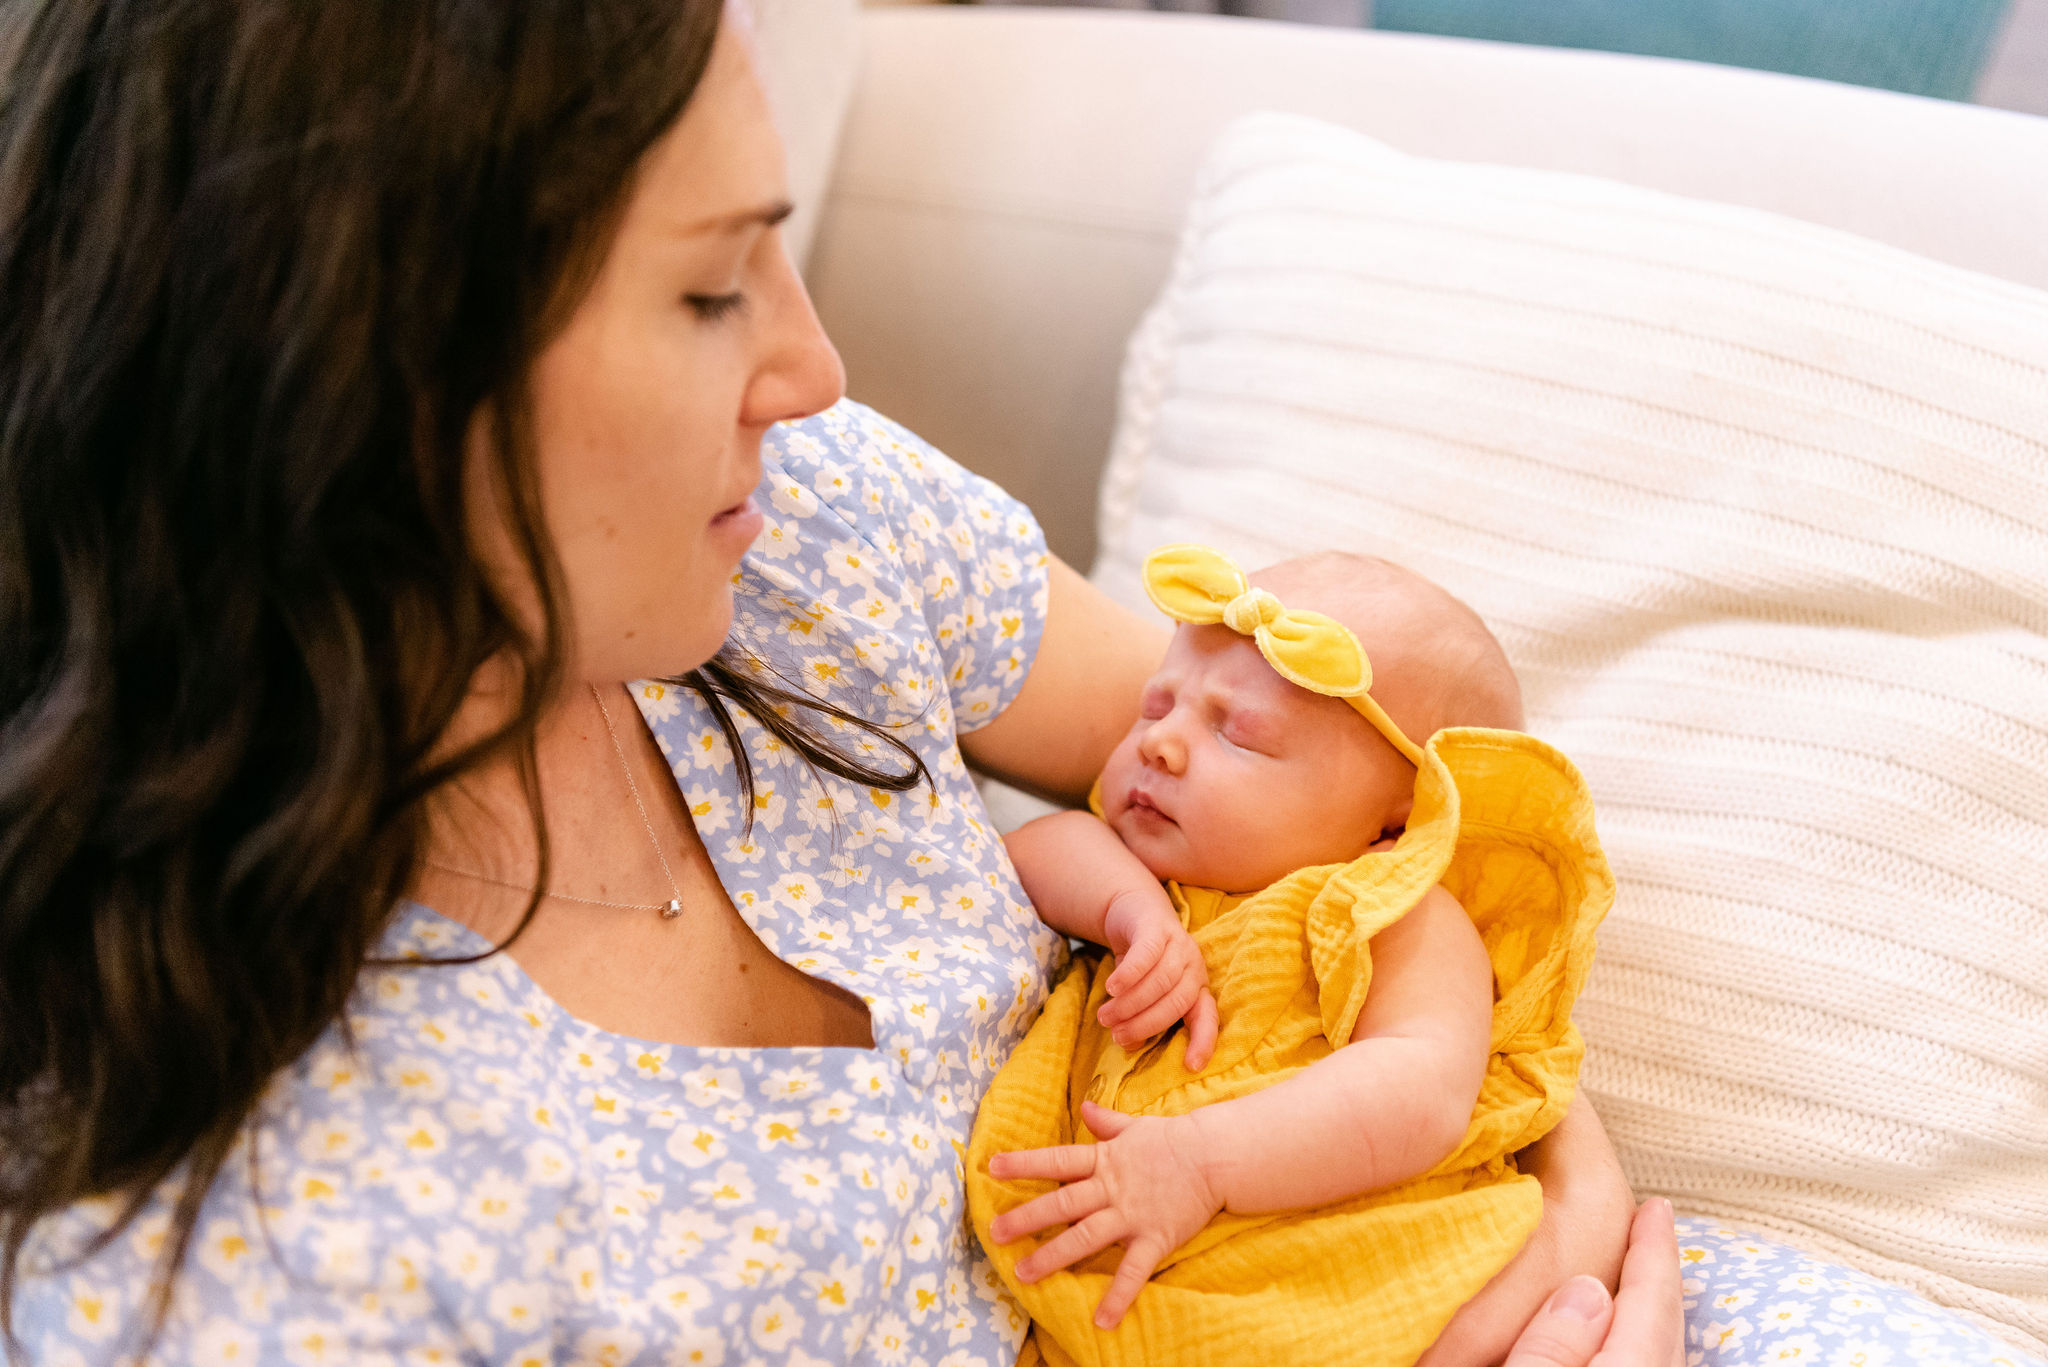 A new mother lays on a bed holding her sleeping newborn baby girl in a yellow dress and bow sarasota pediatricians